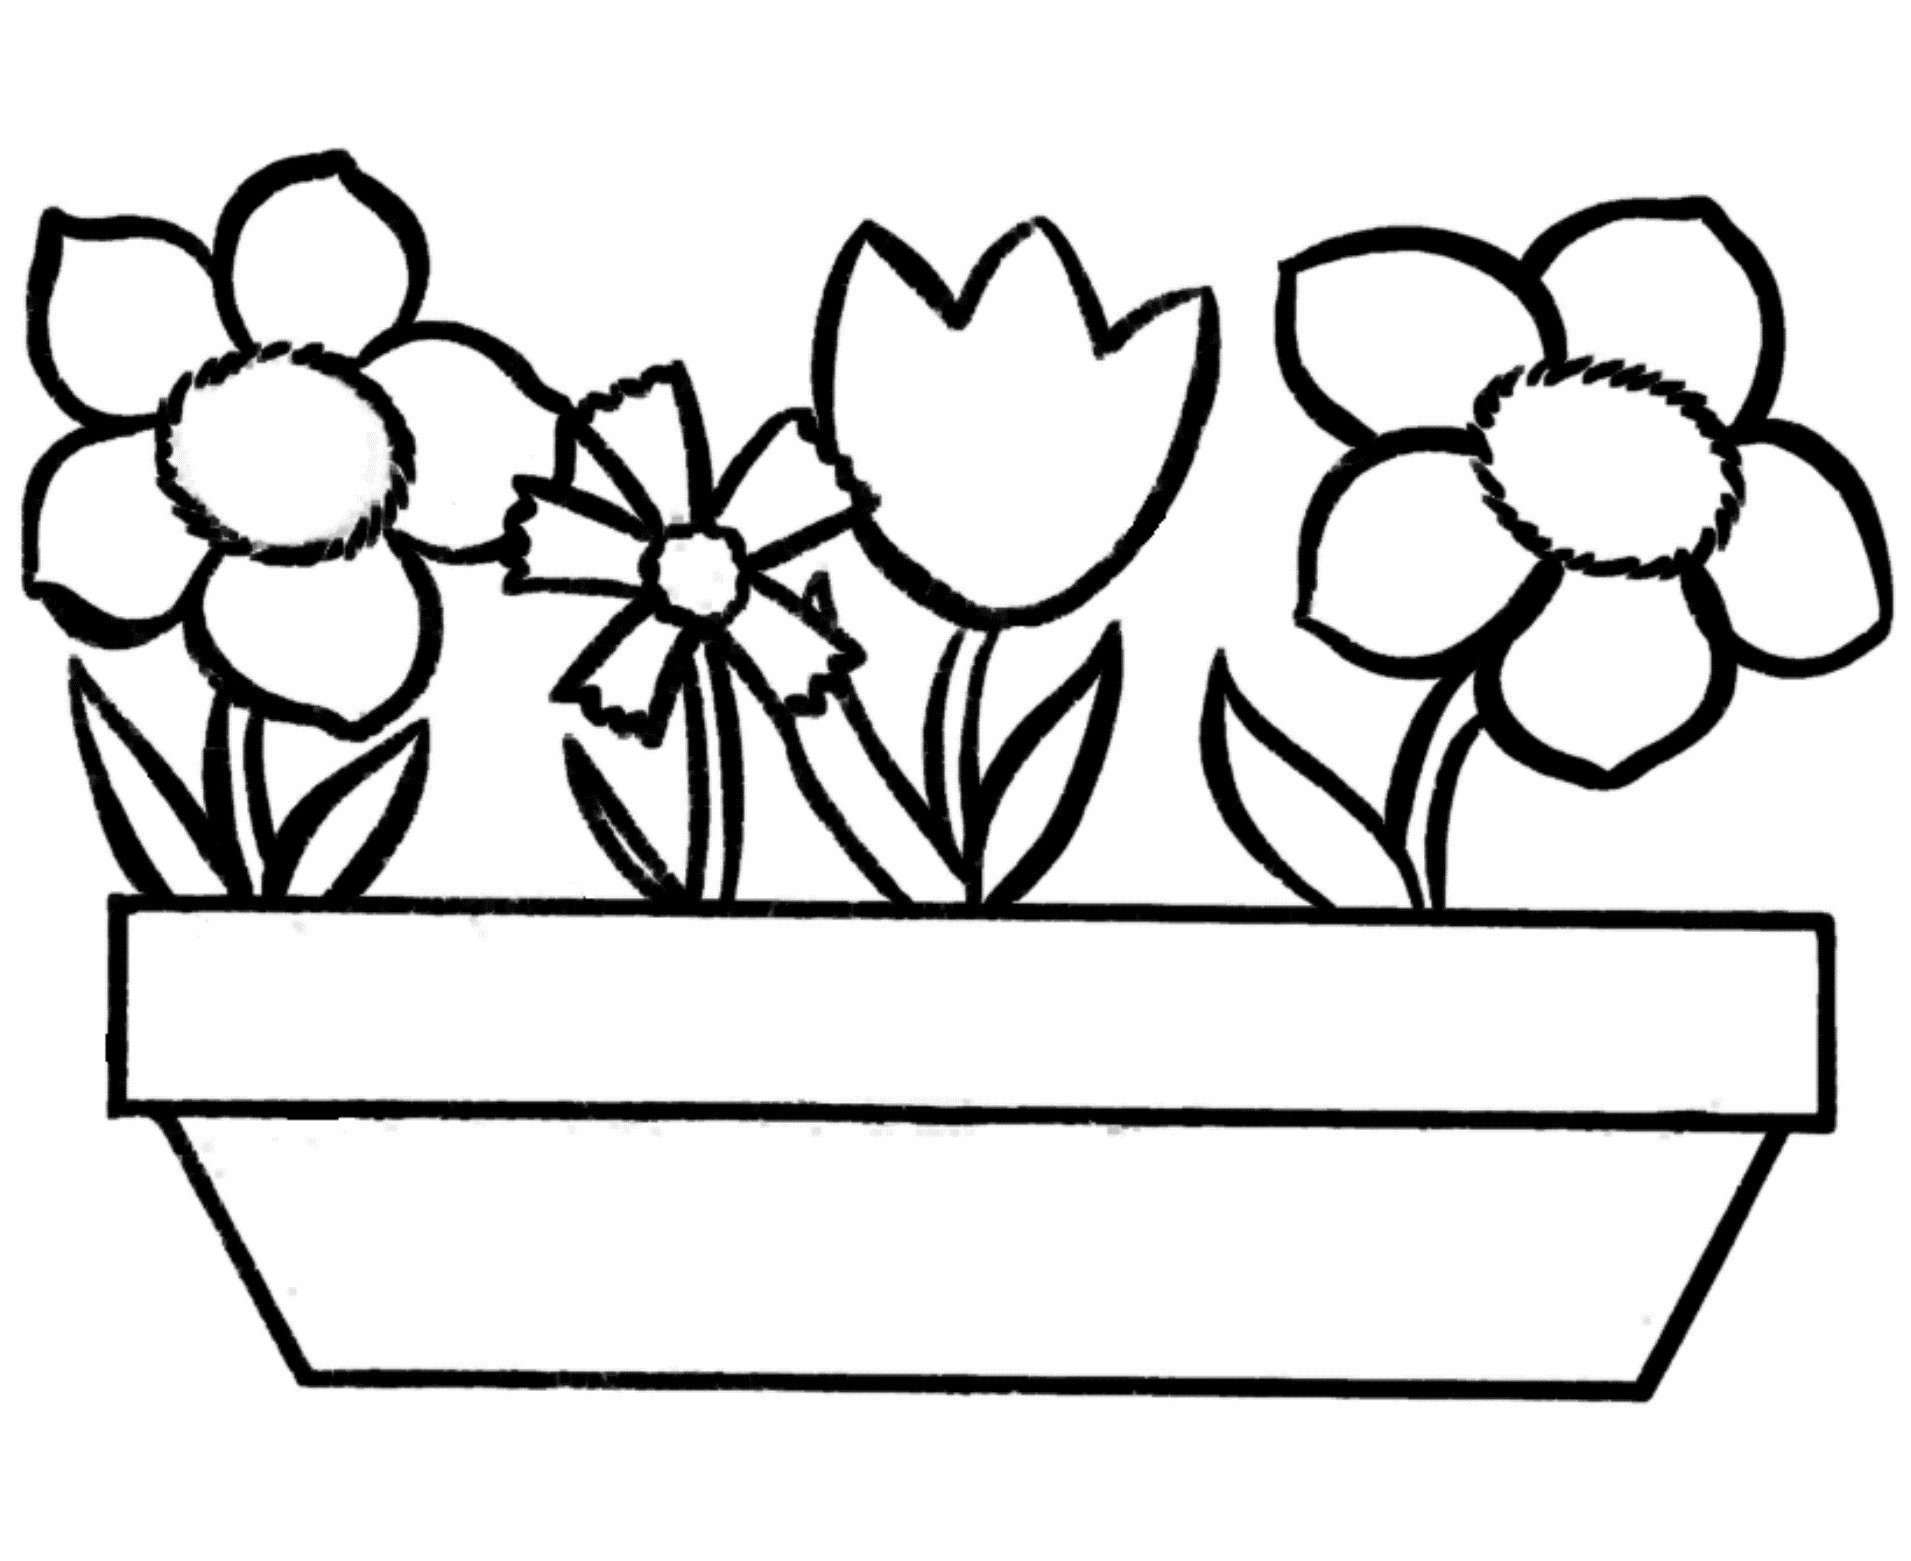 Coloring pictures of beautiful flowers